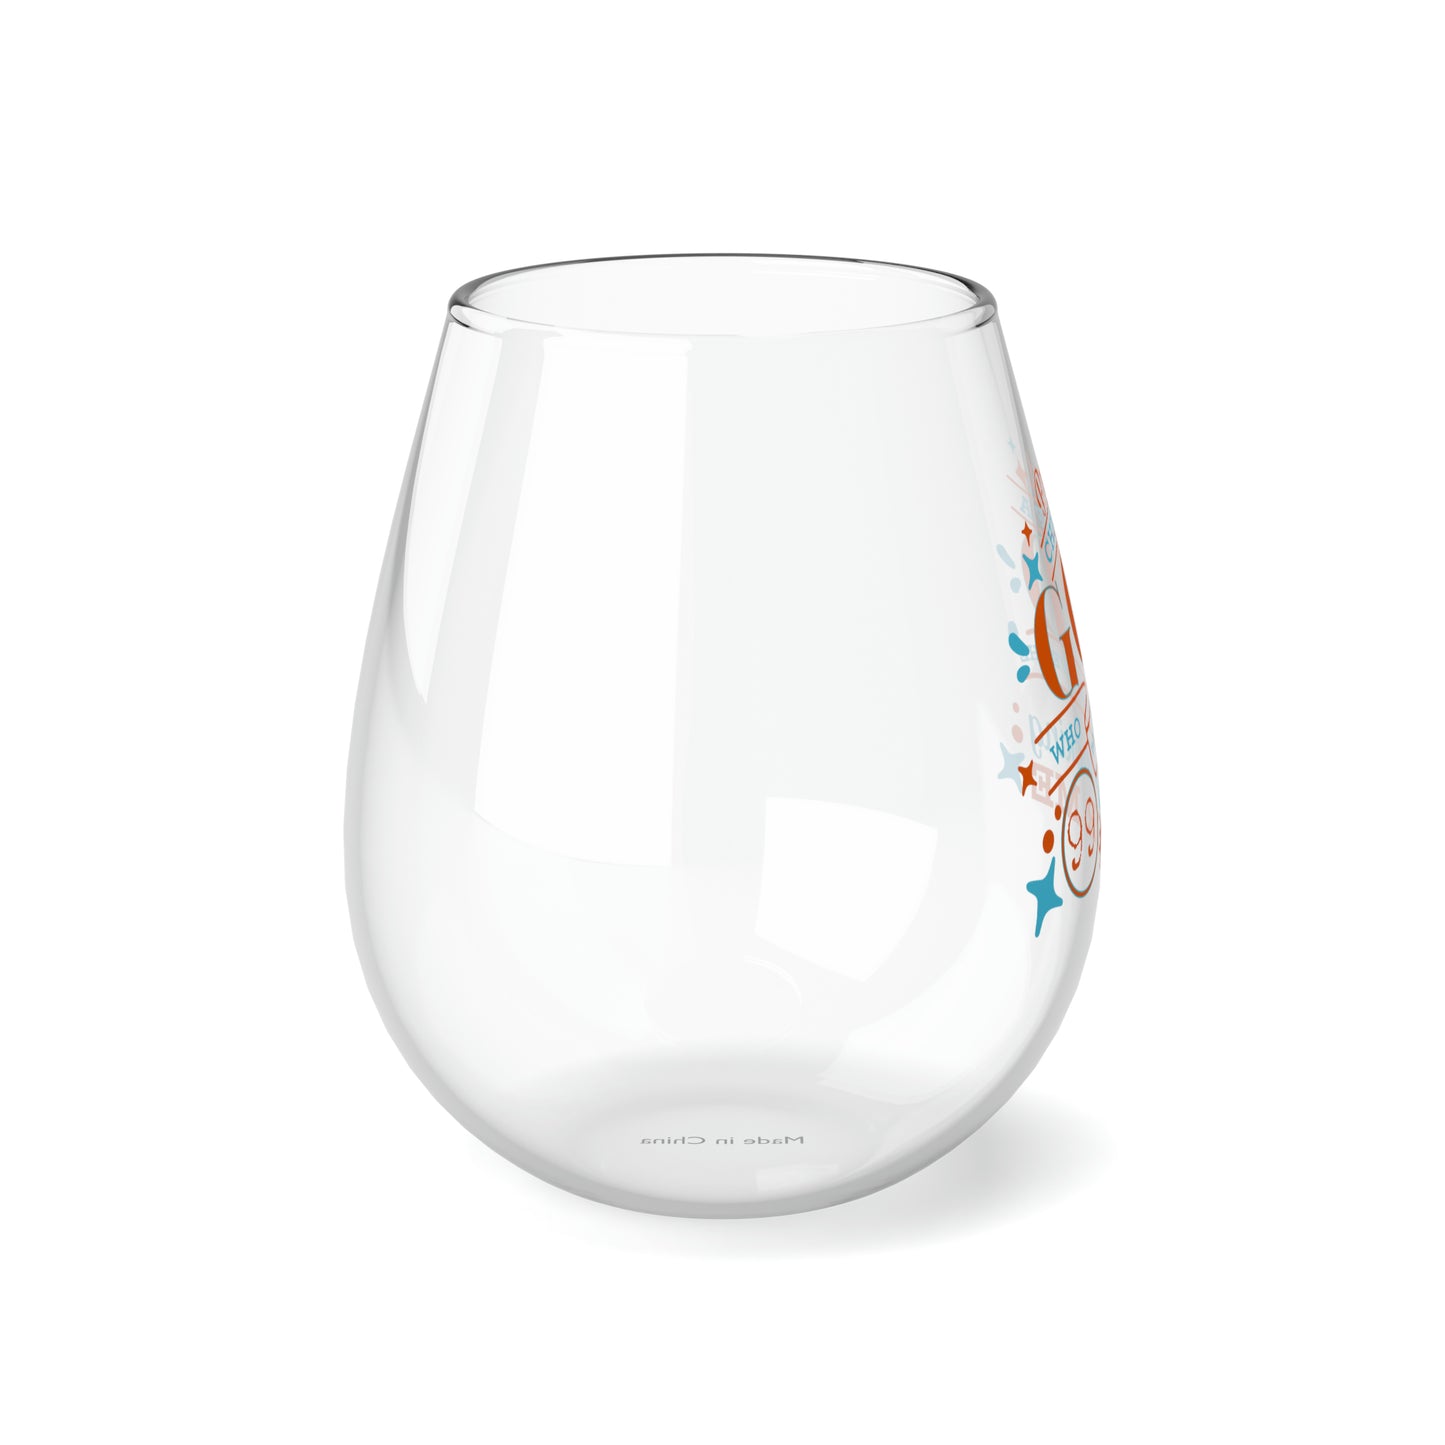 Proud Child Of A God Who Would Leave The 99 Looking For Me Stemless Wine Glass, 11.75oz